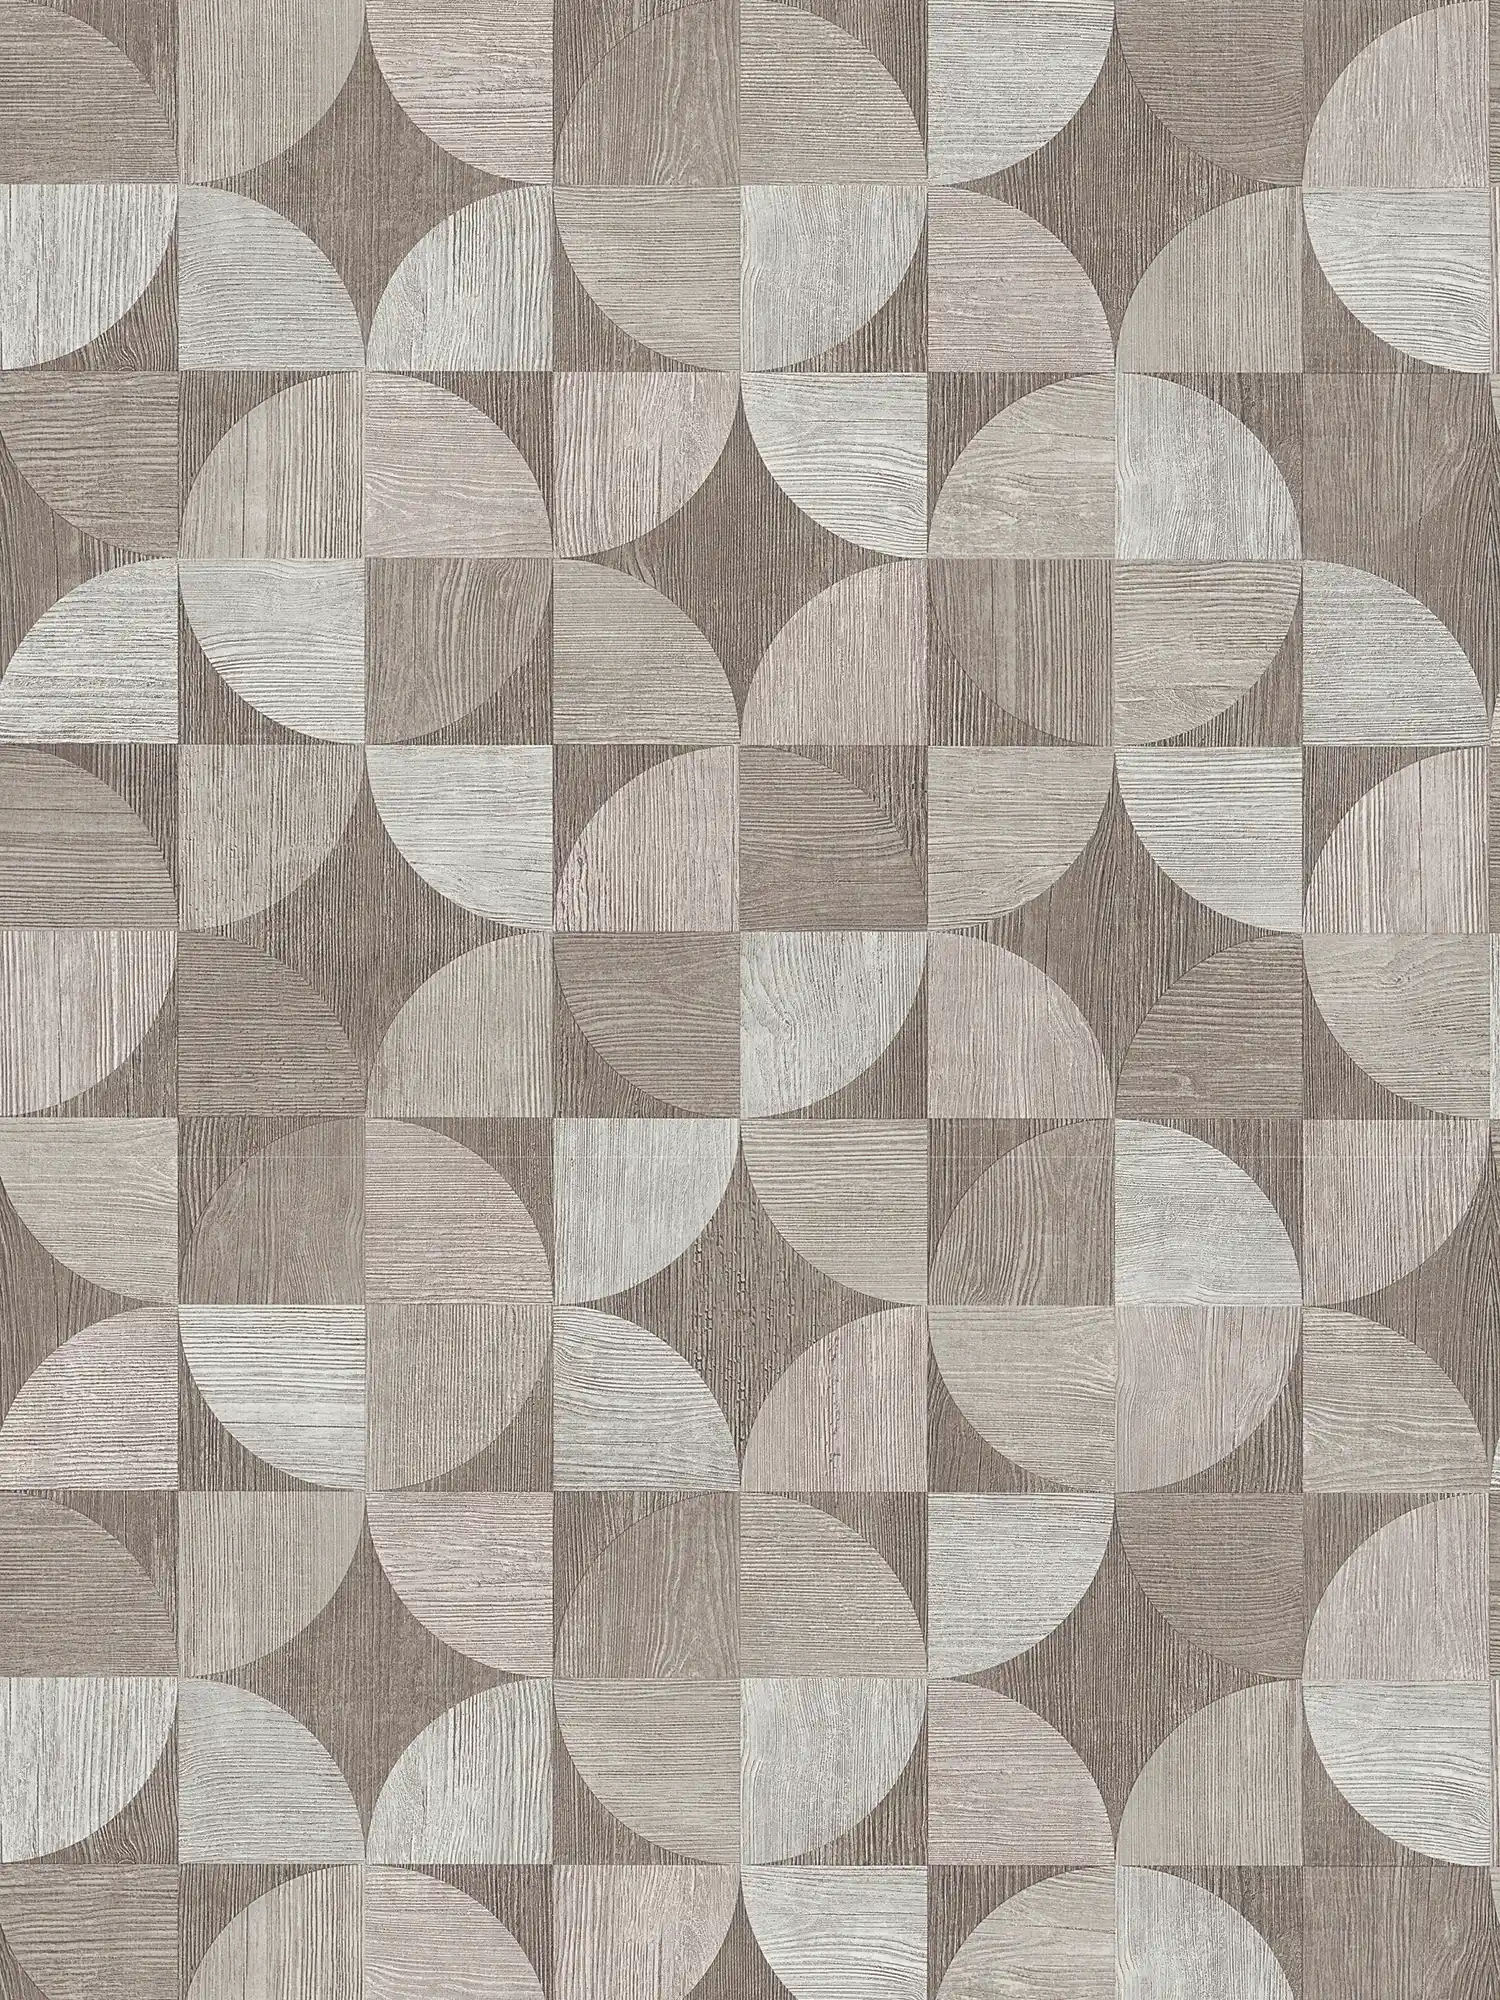         Wallpaper with graphic pattern in wood look - grey
    